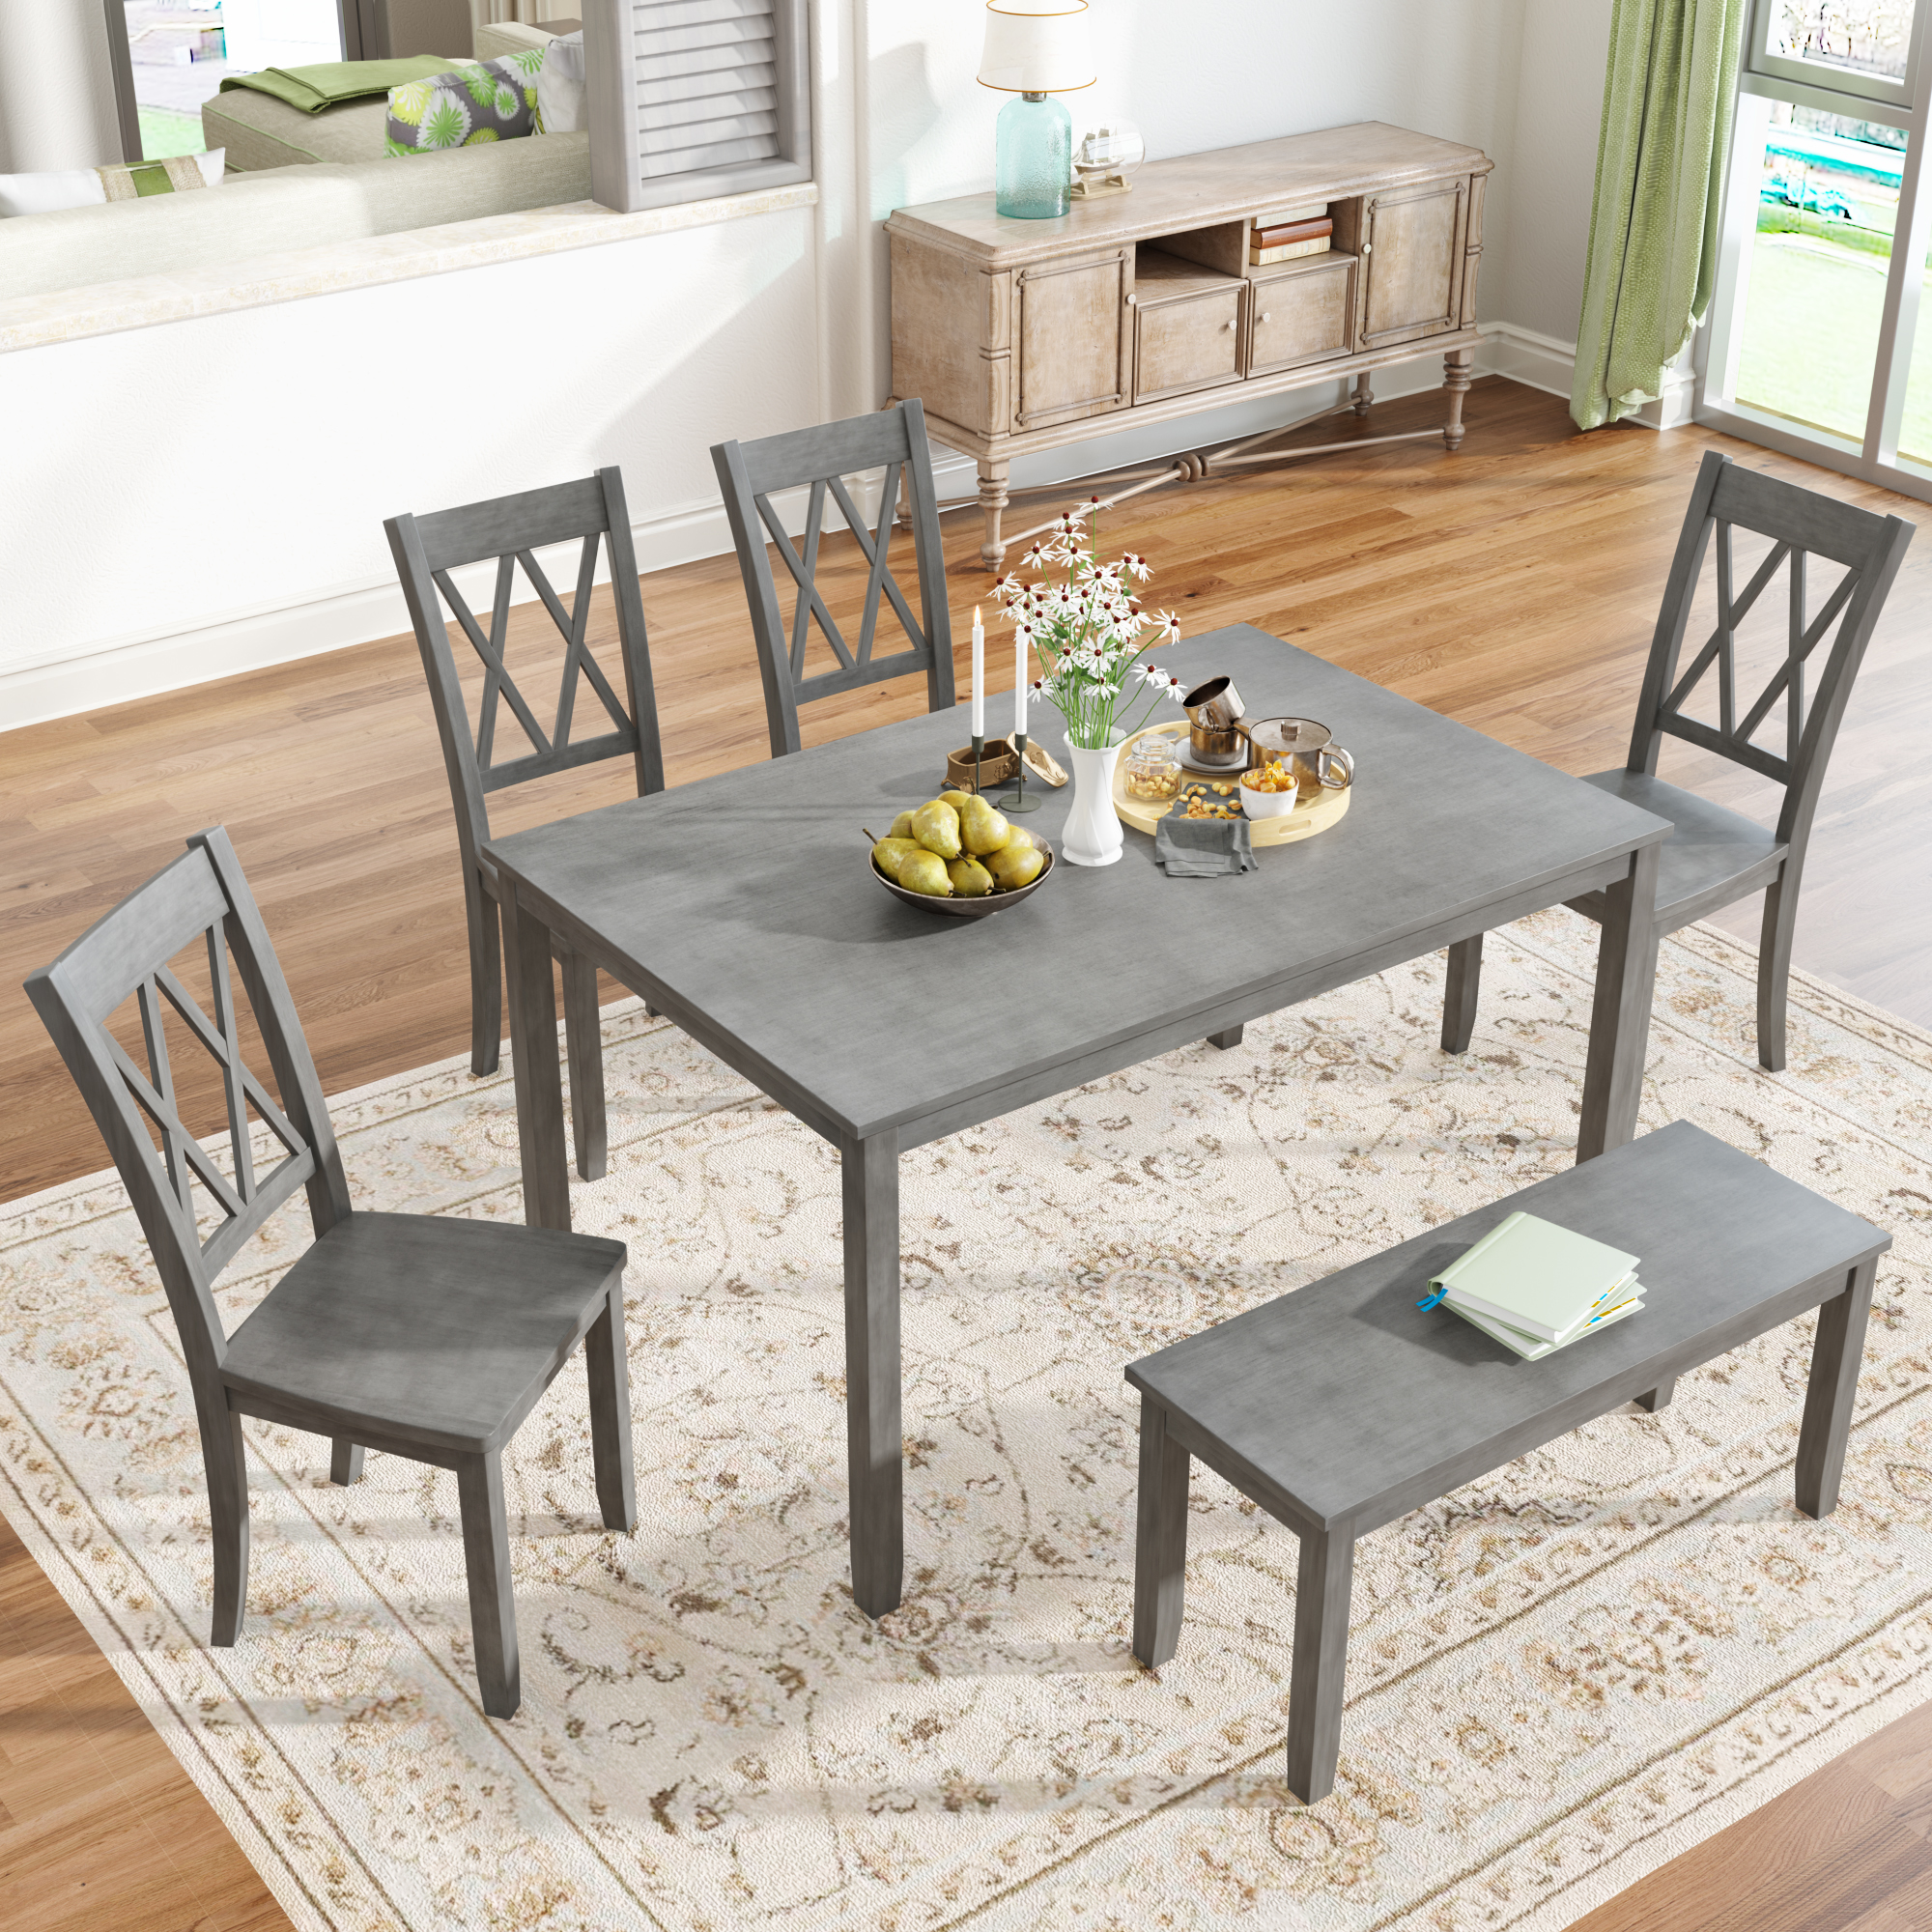 6-Piece Wooden Farmhouse Rustic Dining Table Set - SH000172AAE